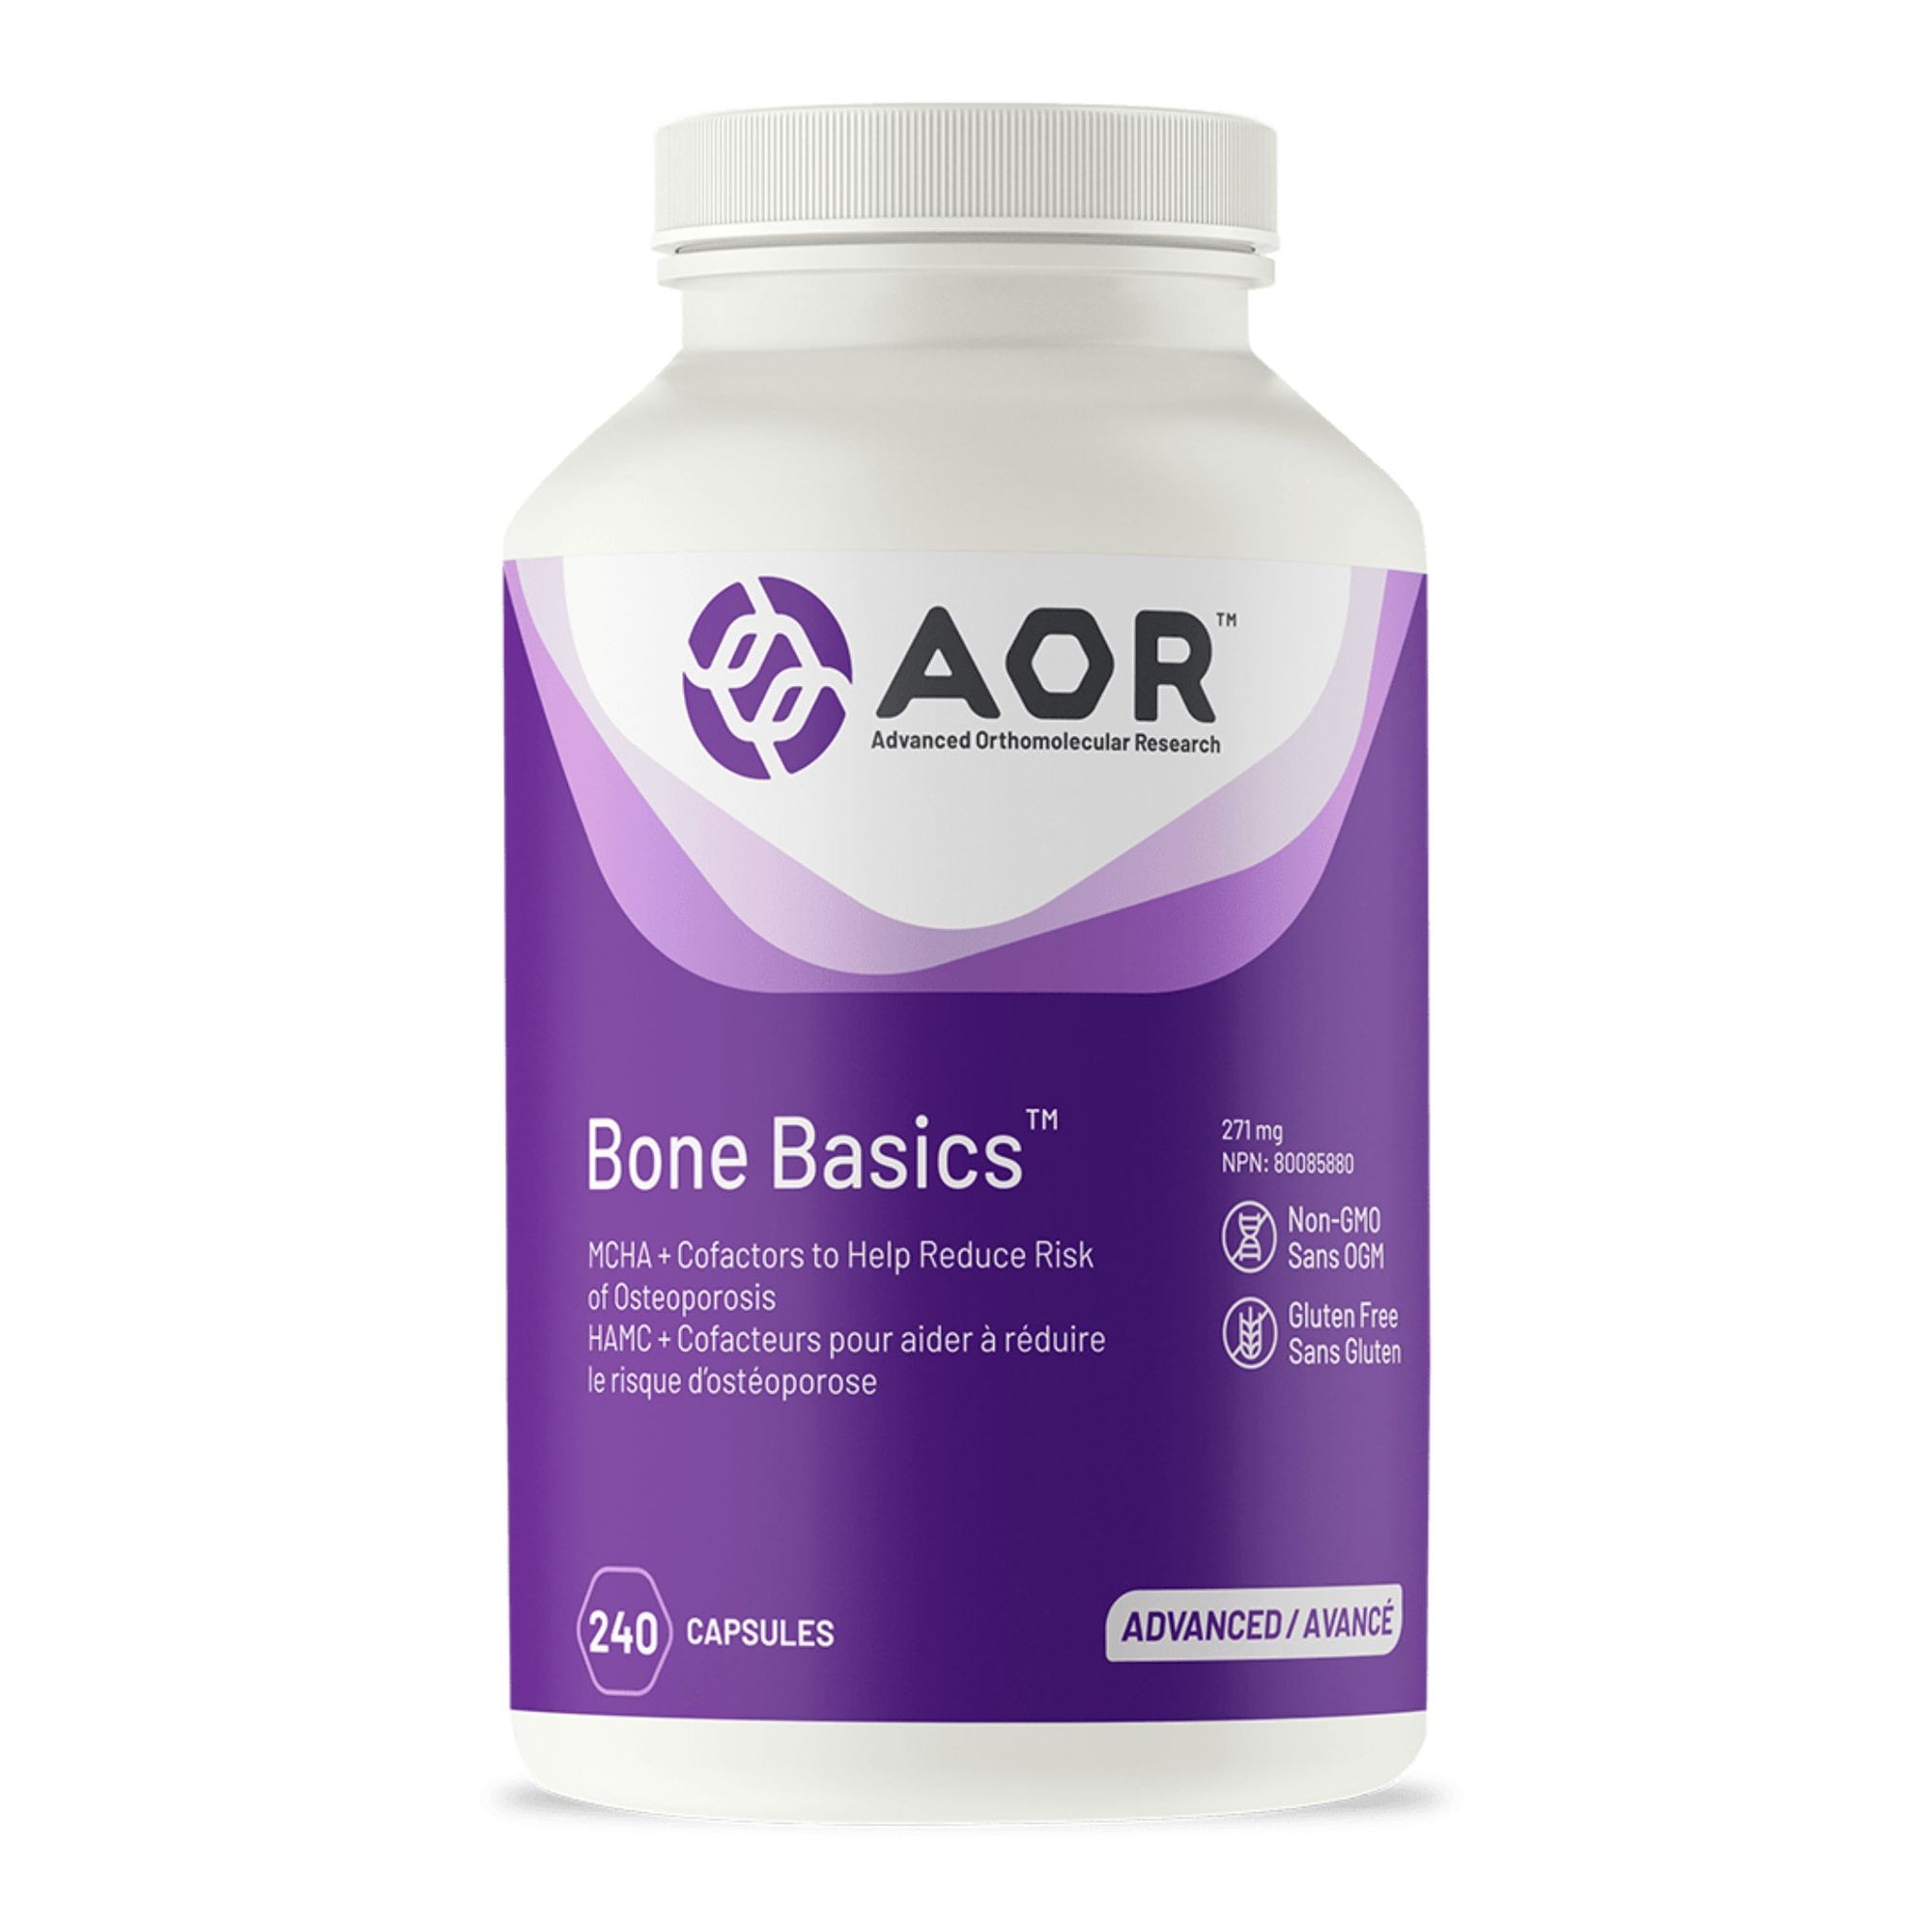 AOR Bone Basics 240 vegetable capsules - MCHA + CoFactors to help reduce the risk of osteoporosis - Non-GMO and Gluten free